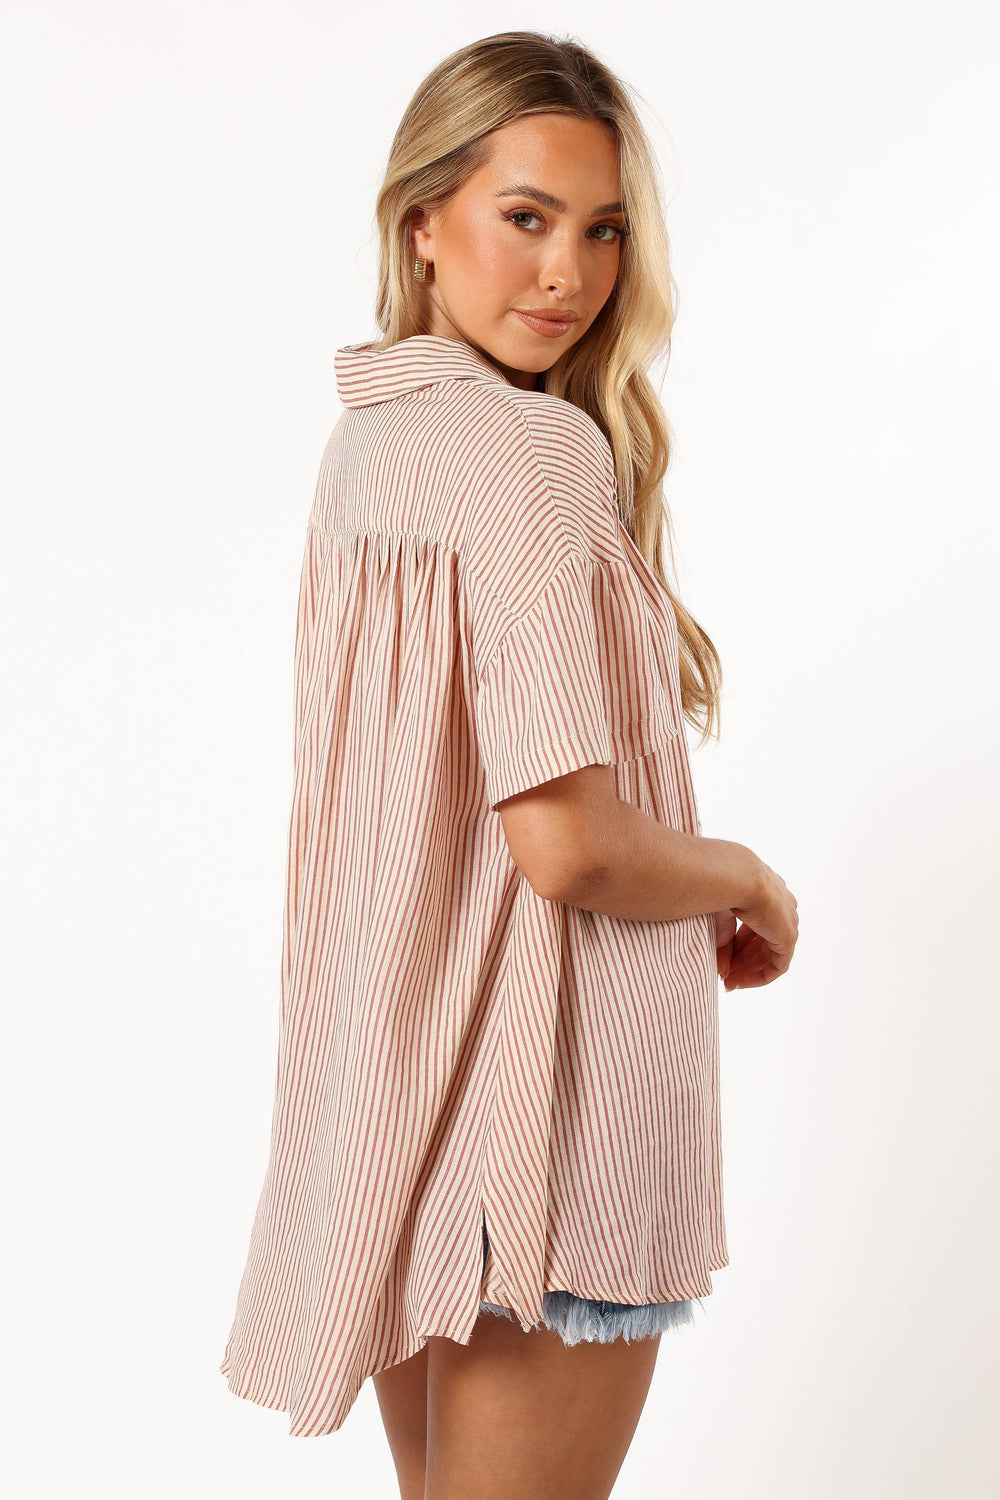 Petal and Pup USA TOPS Piper Button Down Top - Cream Pink